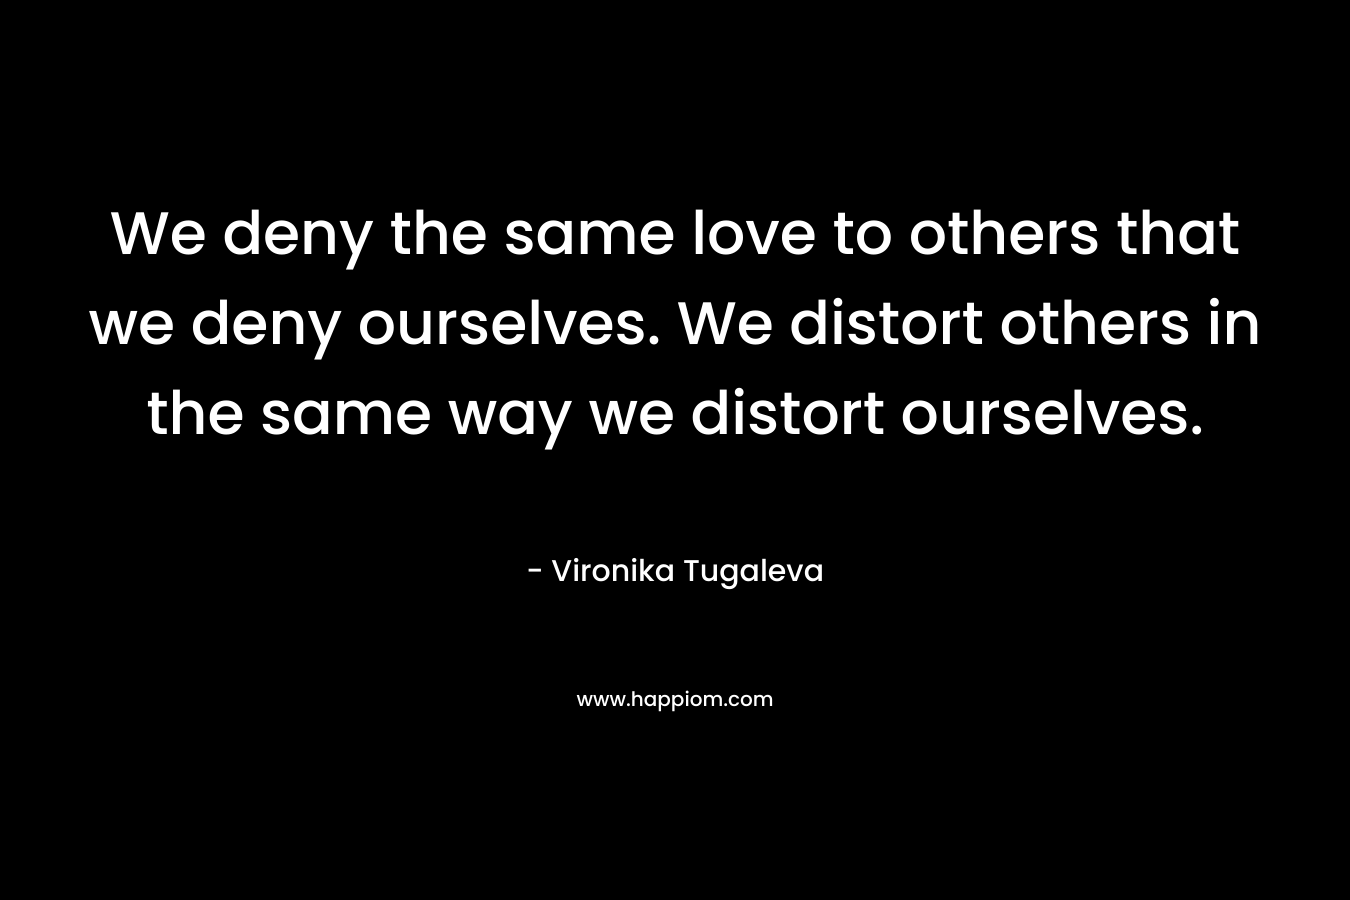 We deny the same love to others that we deny ourselves. We distort others in the same way we distort ourselves. – Vironika Tugaleva